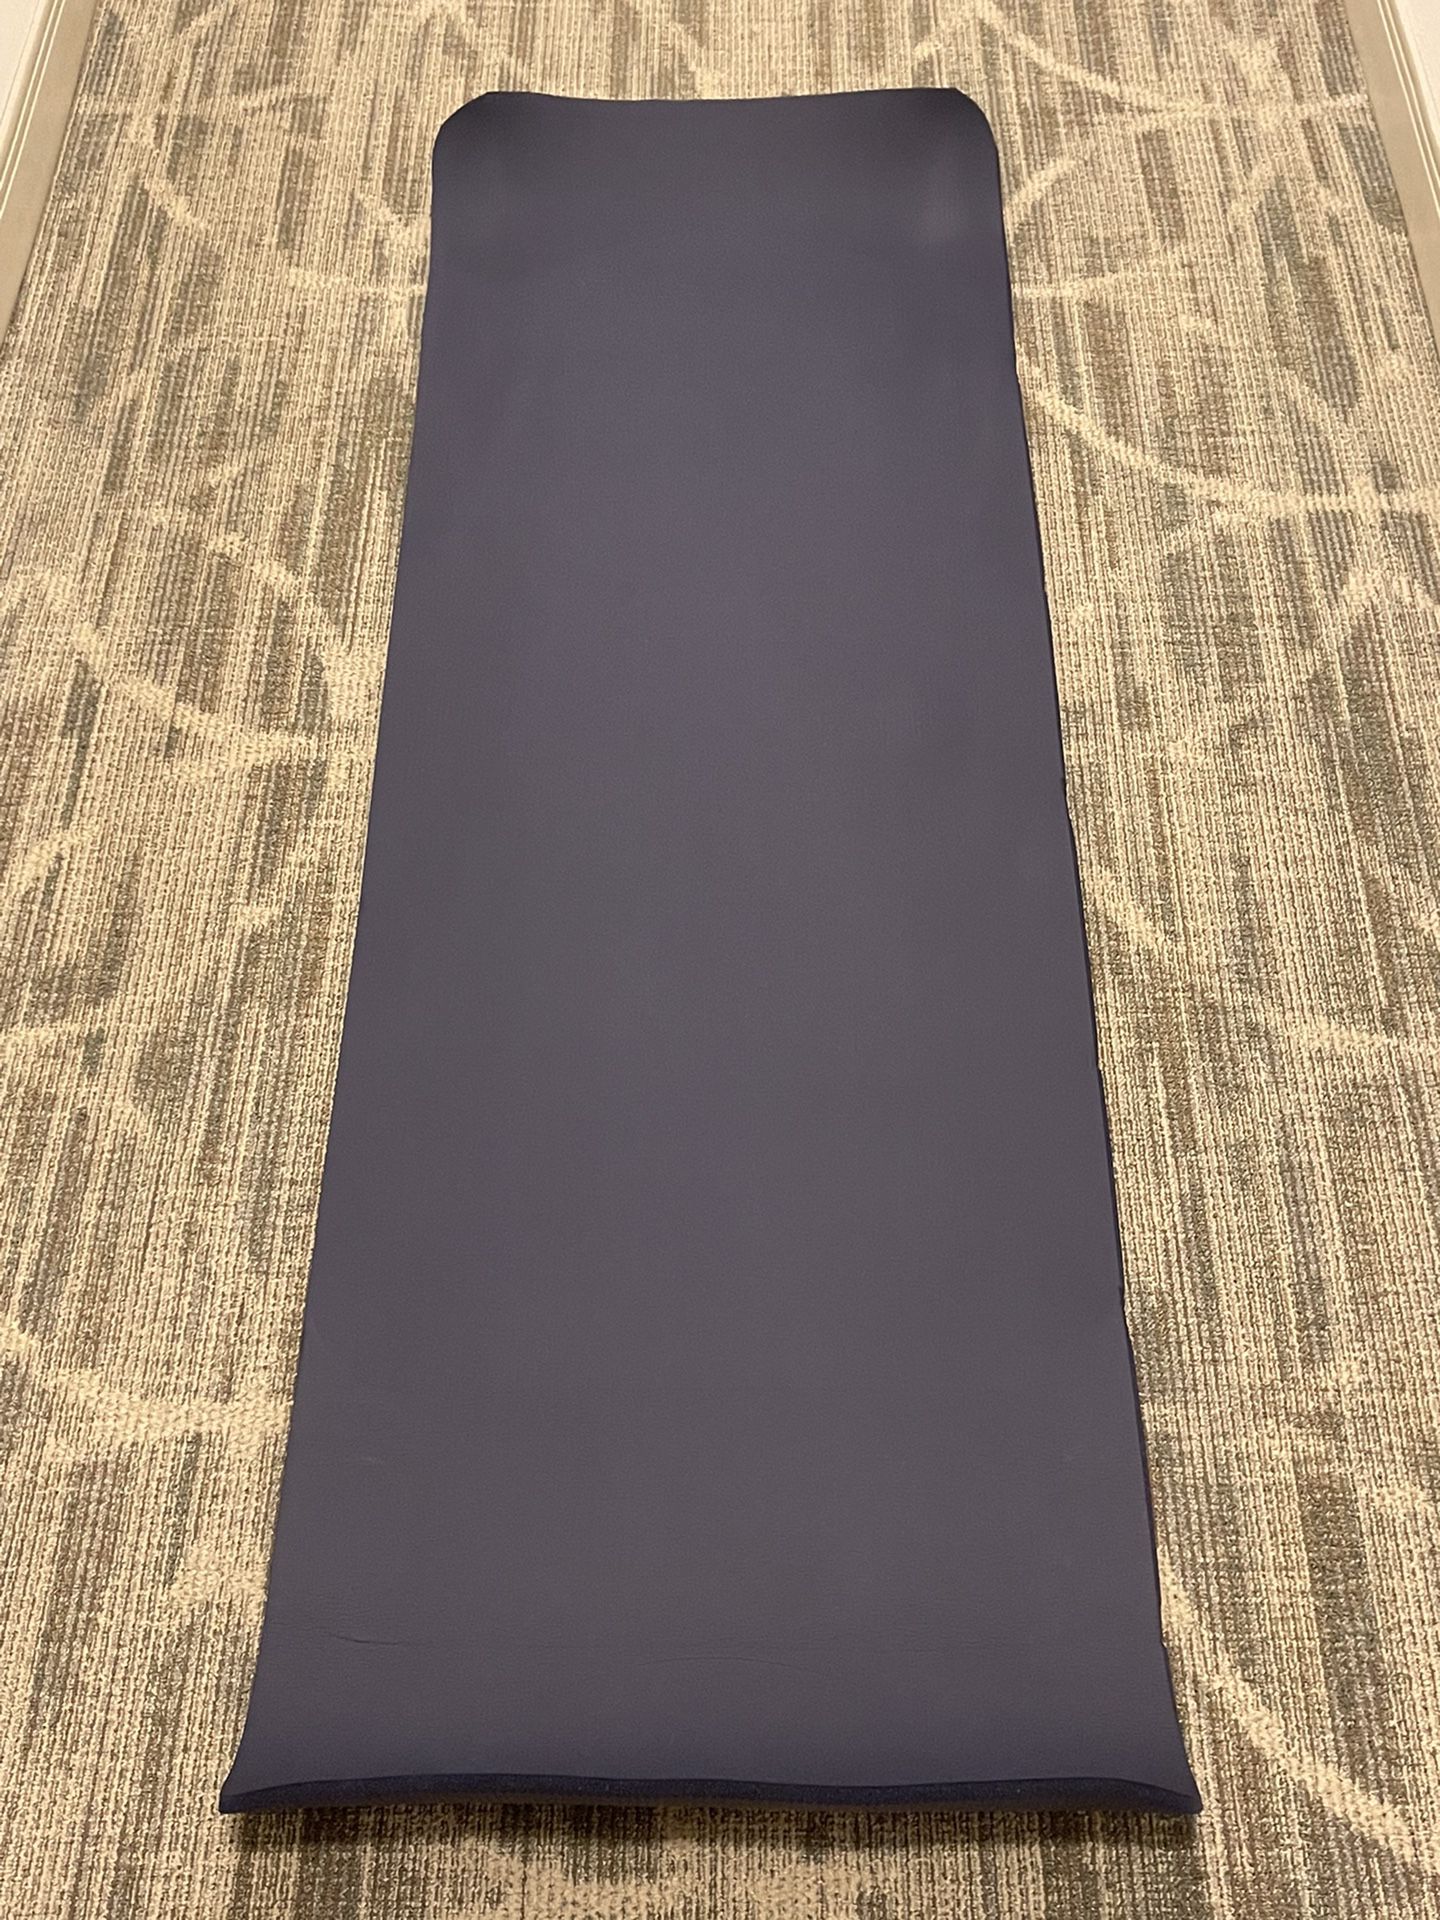 Large (71" L x 24" W x .5" Thick) EXERCISE MATT - firm price 